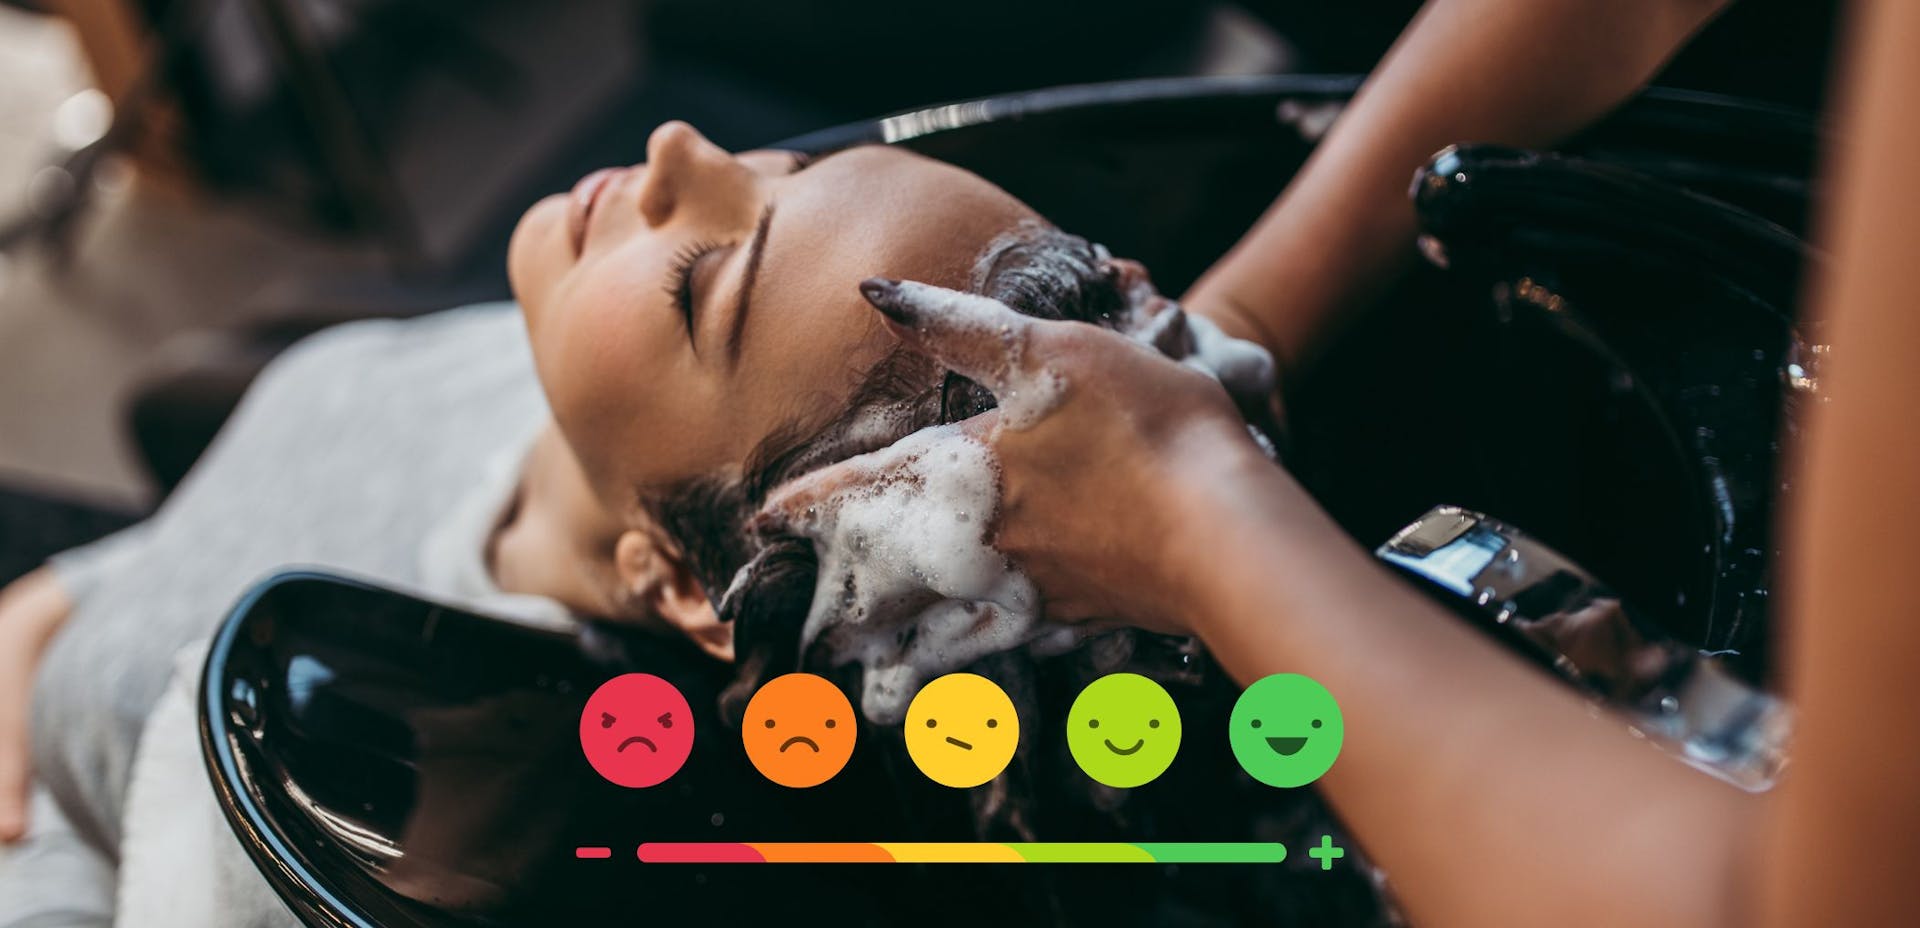 How to get Customer Feedback and Online Reviews for a Salon?